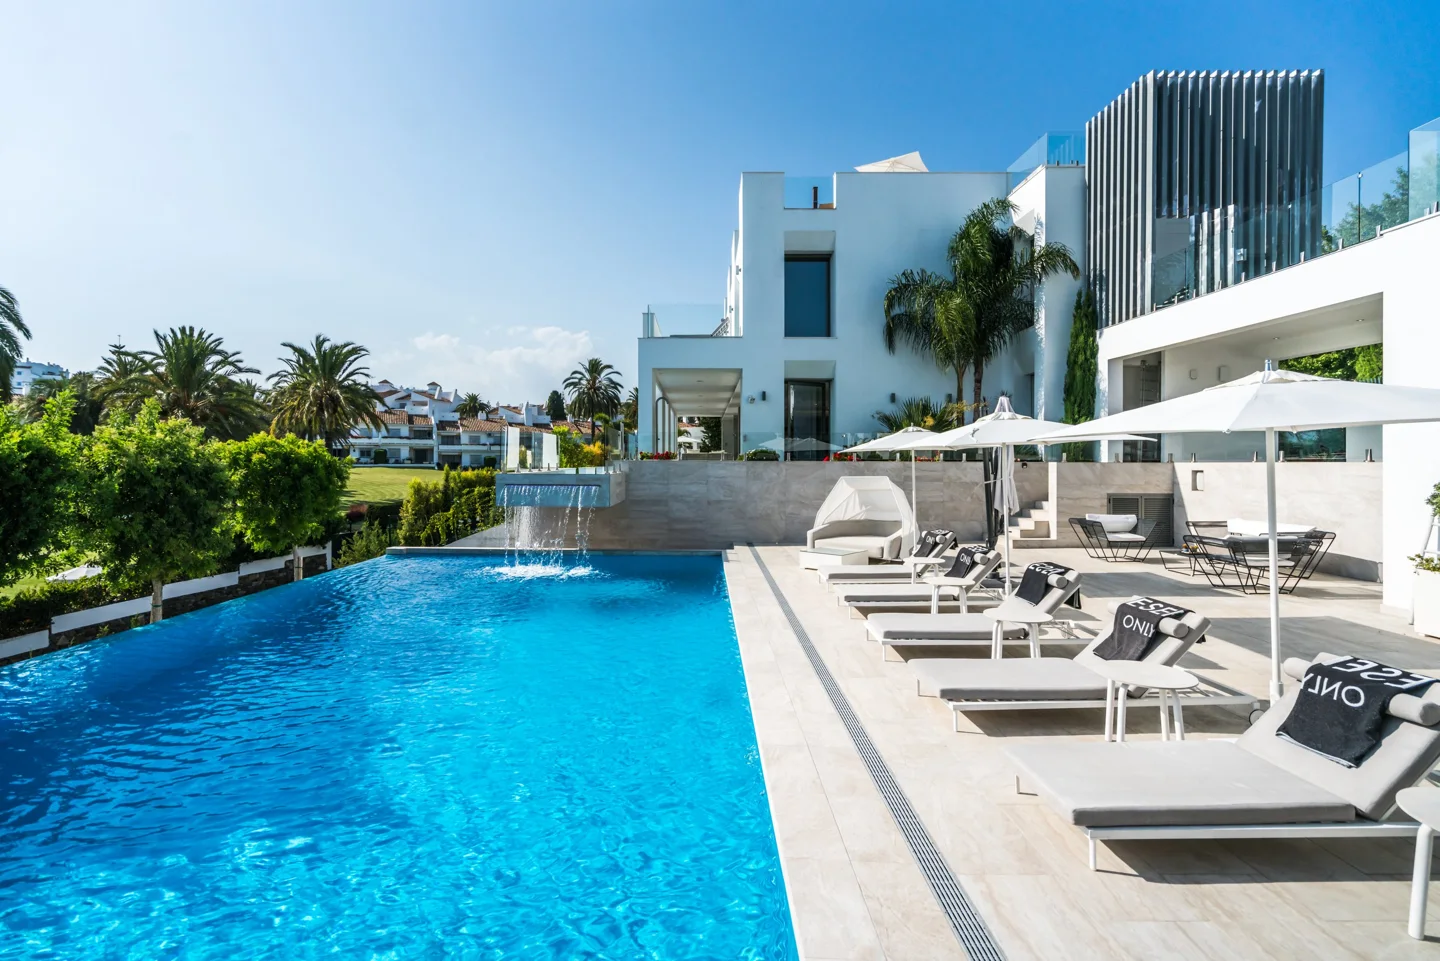 Magnificent Luxury Villa in Puerto Banús with State of the Art design